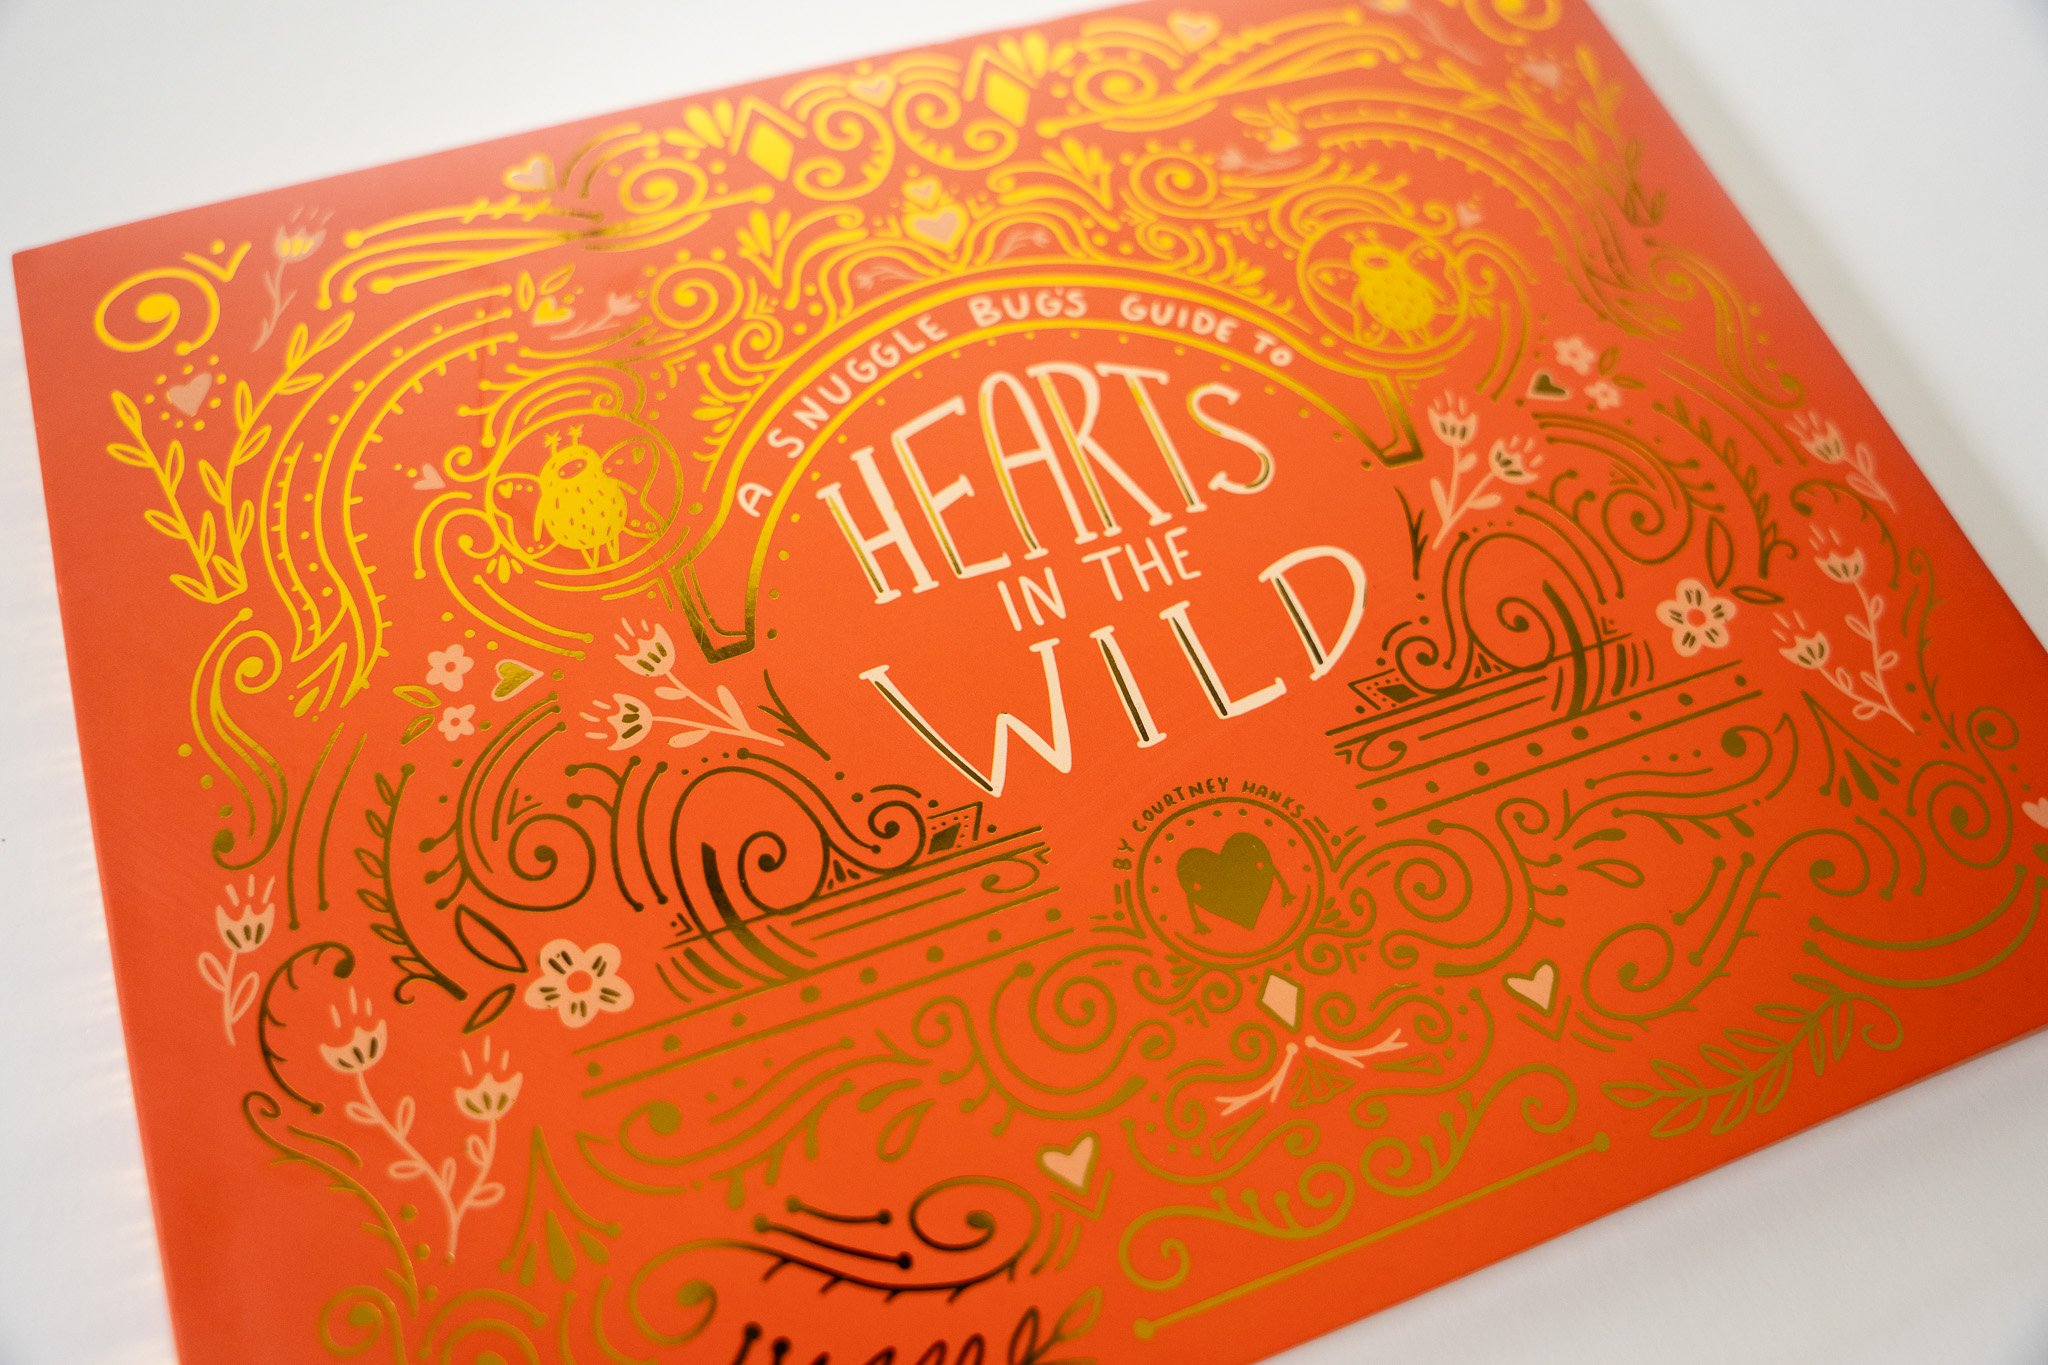 A Snuggle Bug's Guide to Hearts in the Wild — Not Bad Design Co.